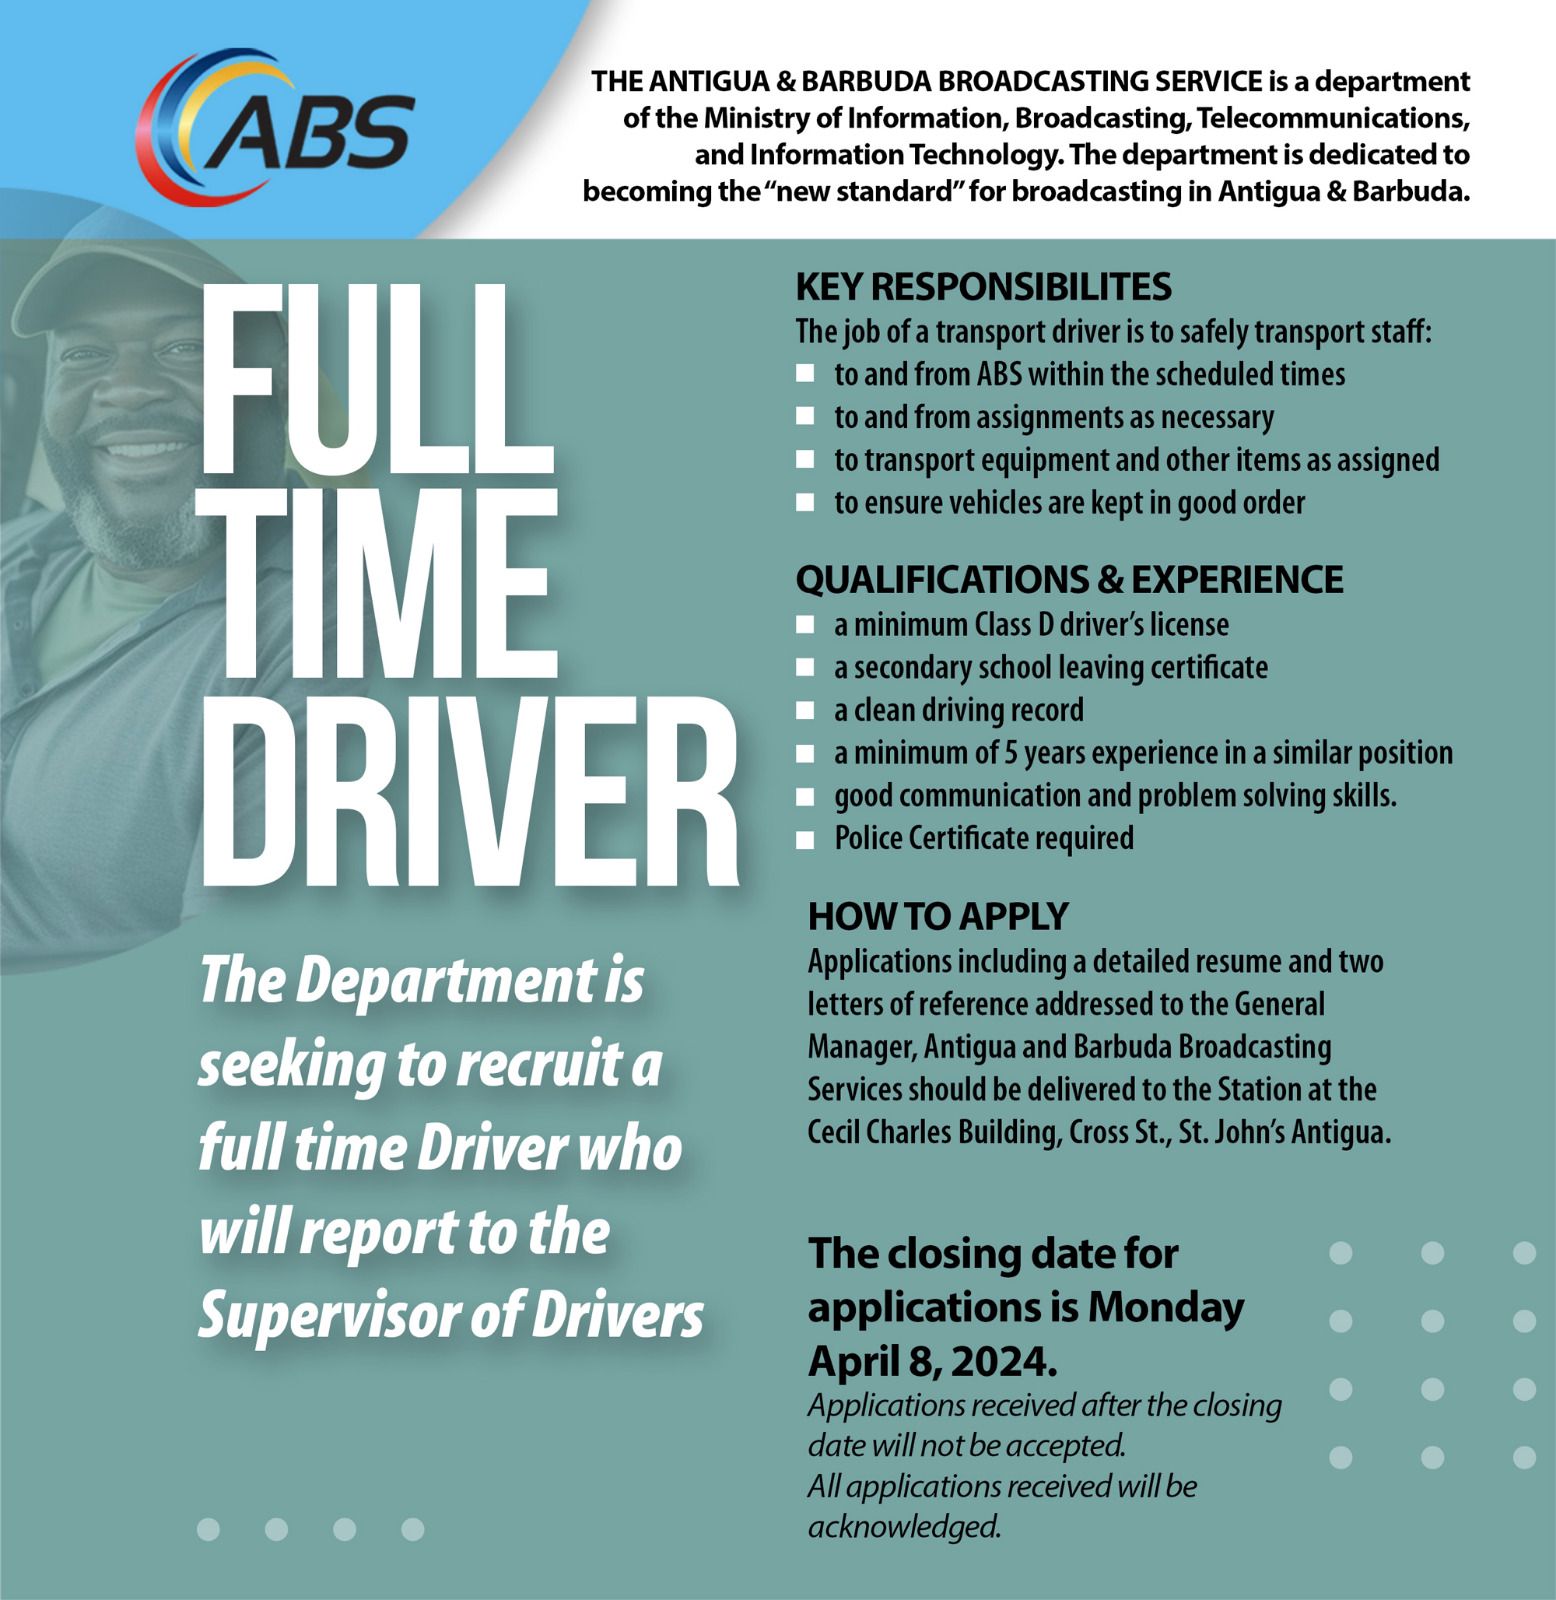 The Department is seeking to recruit a full time Driver who will report to the Supervisor of Drivers